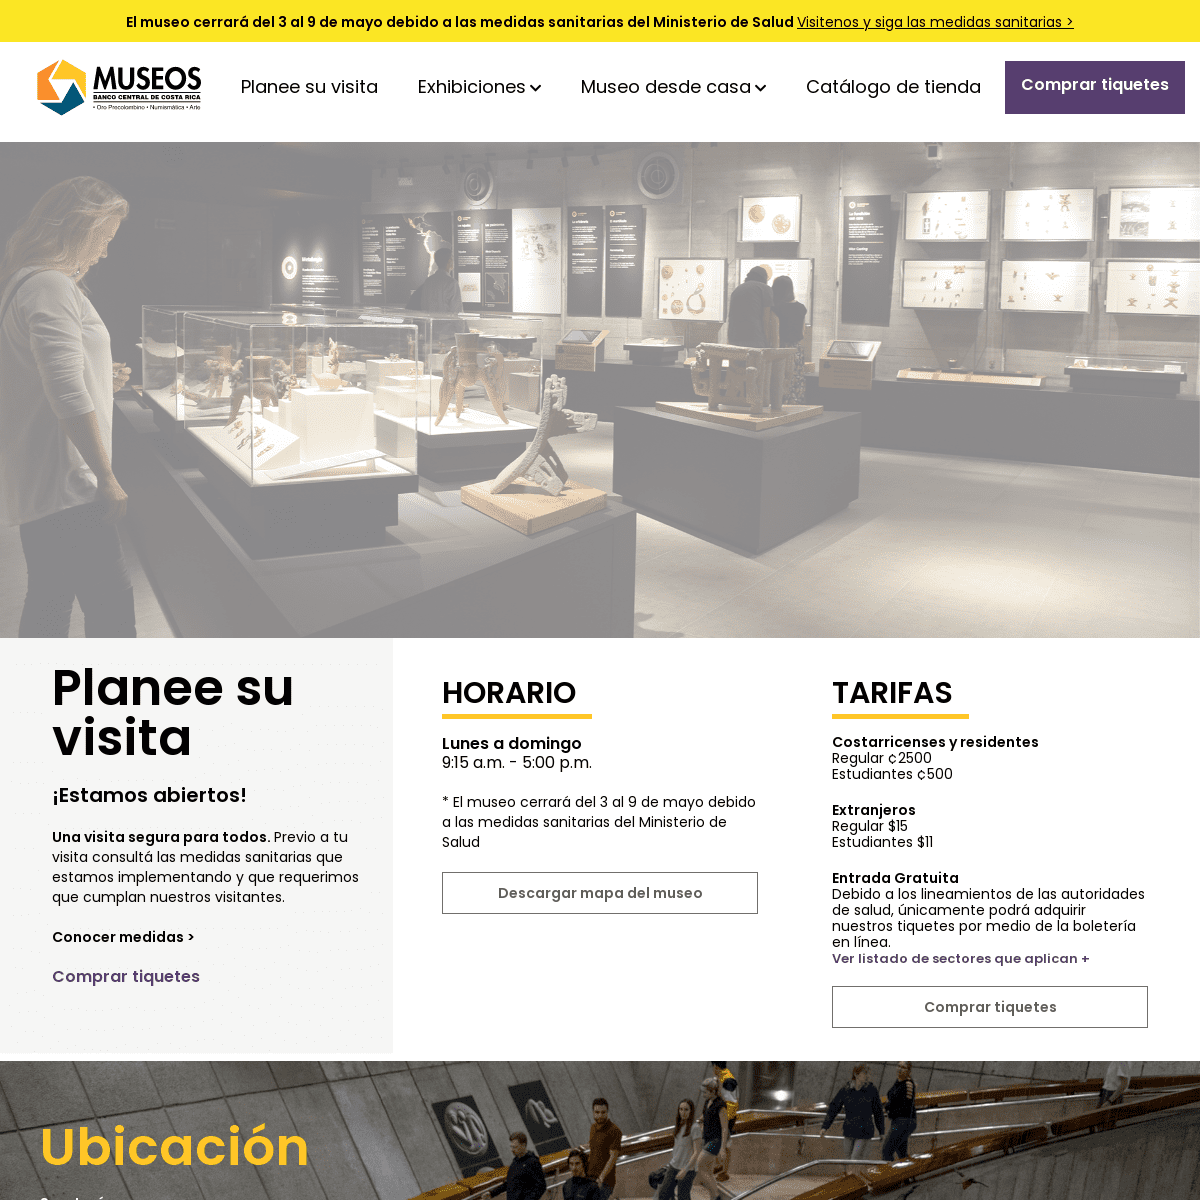 A complete backup of https://museosdelbancocentral.org